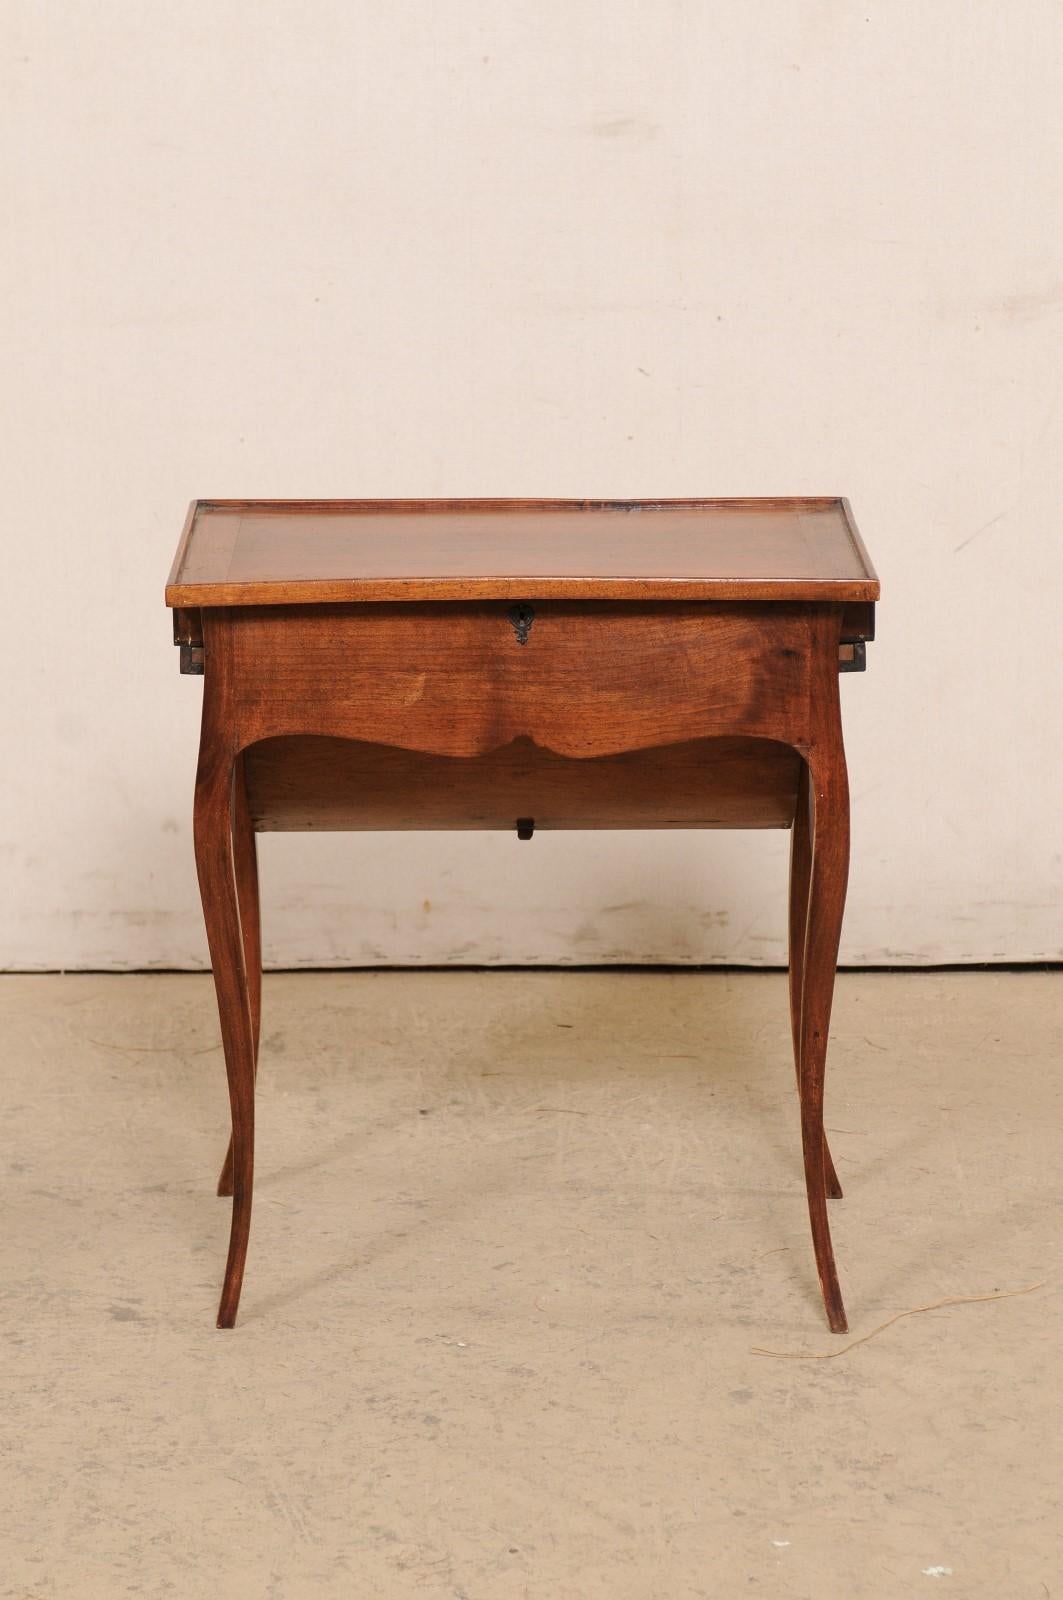 French 19th C. Table w/ Unusual & Creative Drop Down Storage-Great for Crafting 7